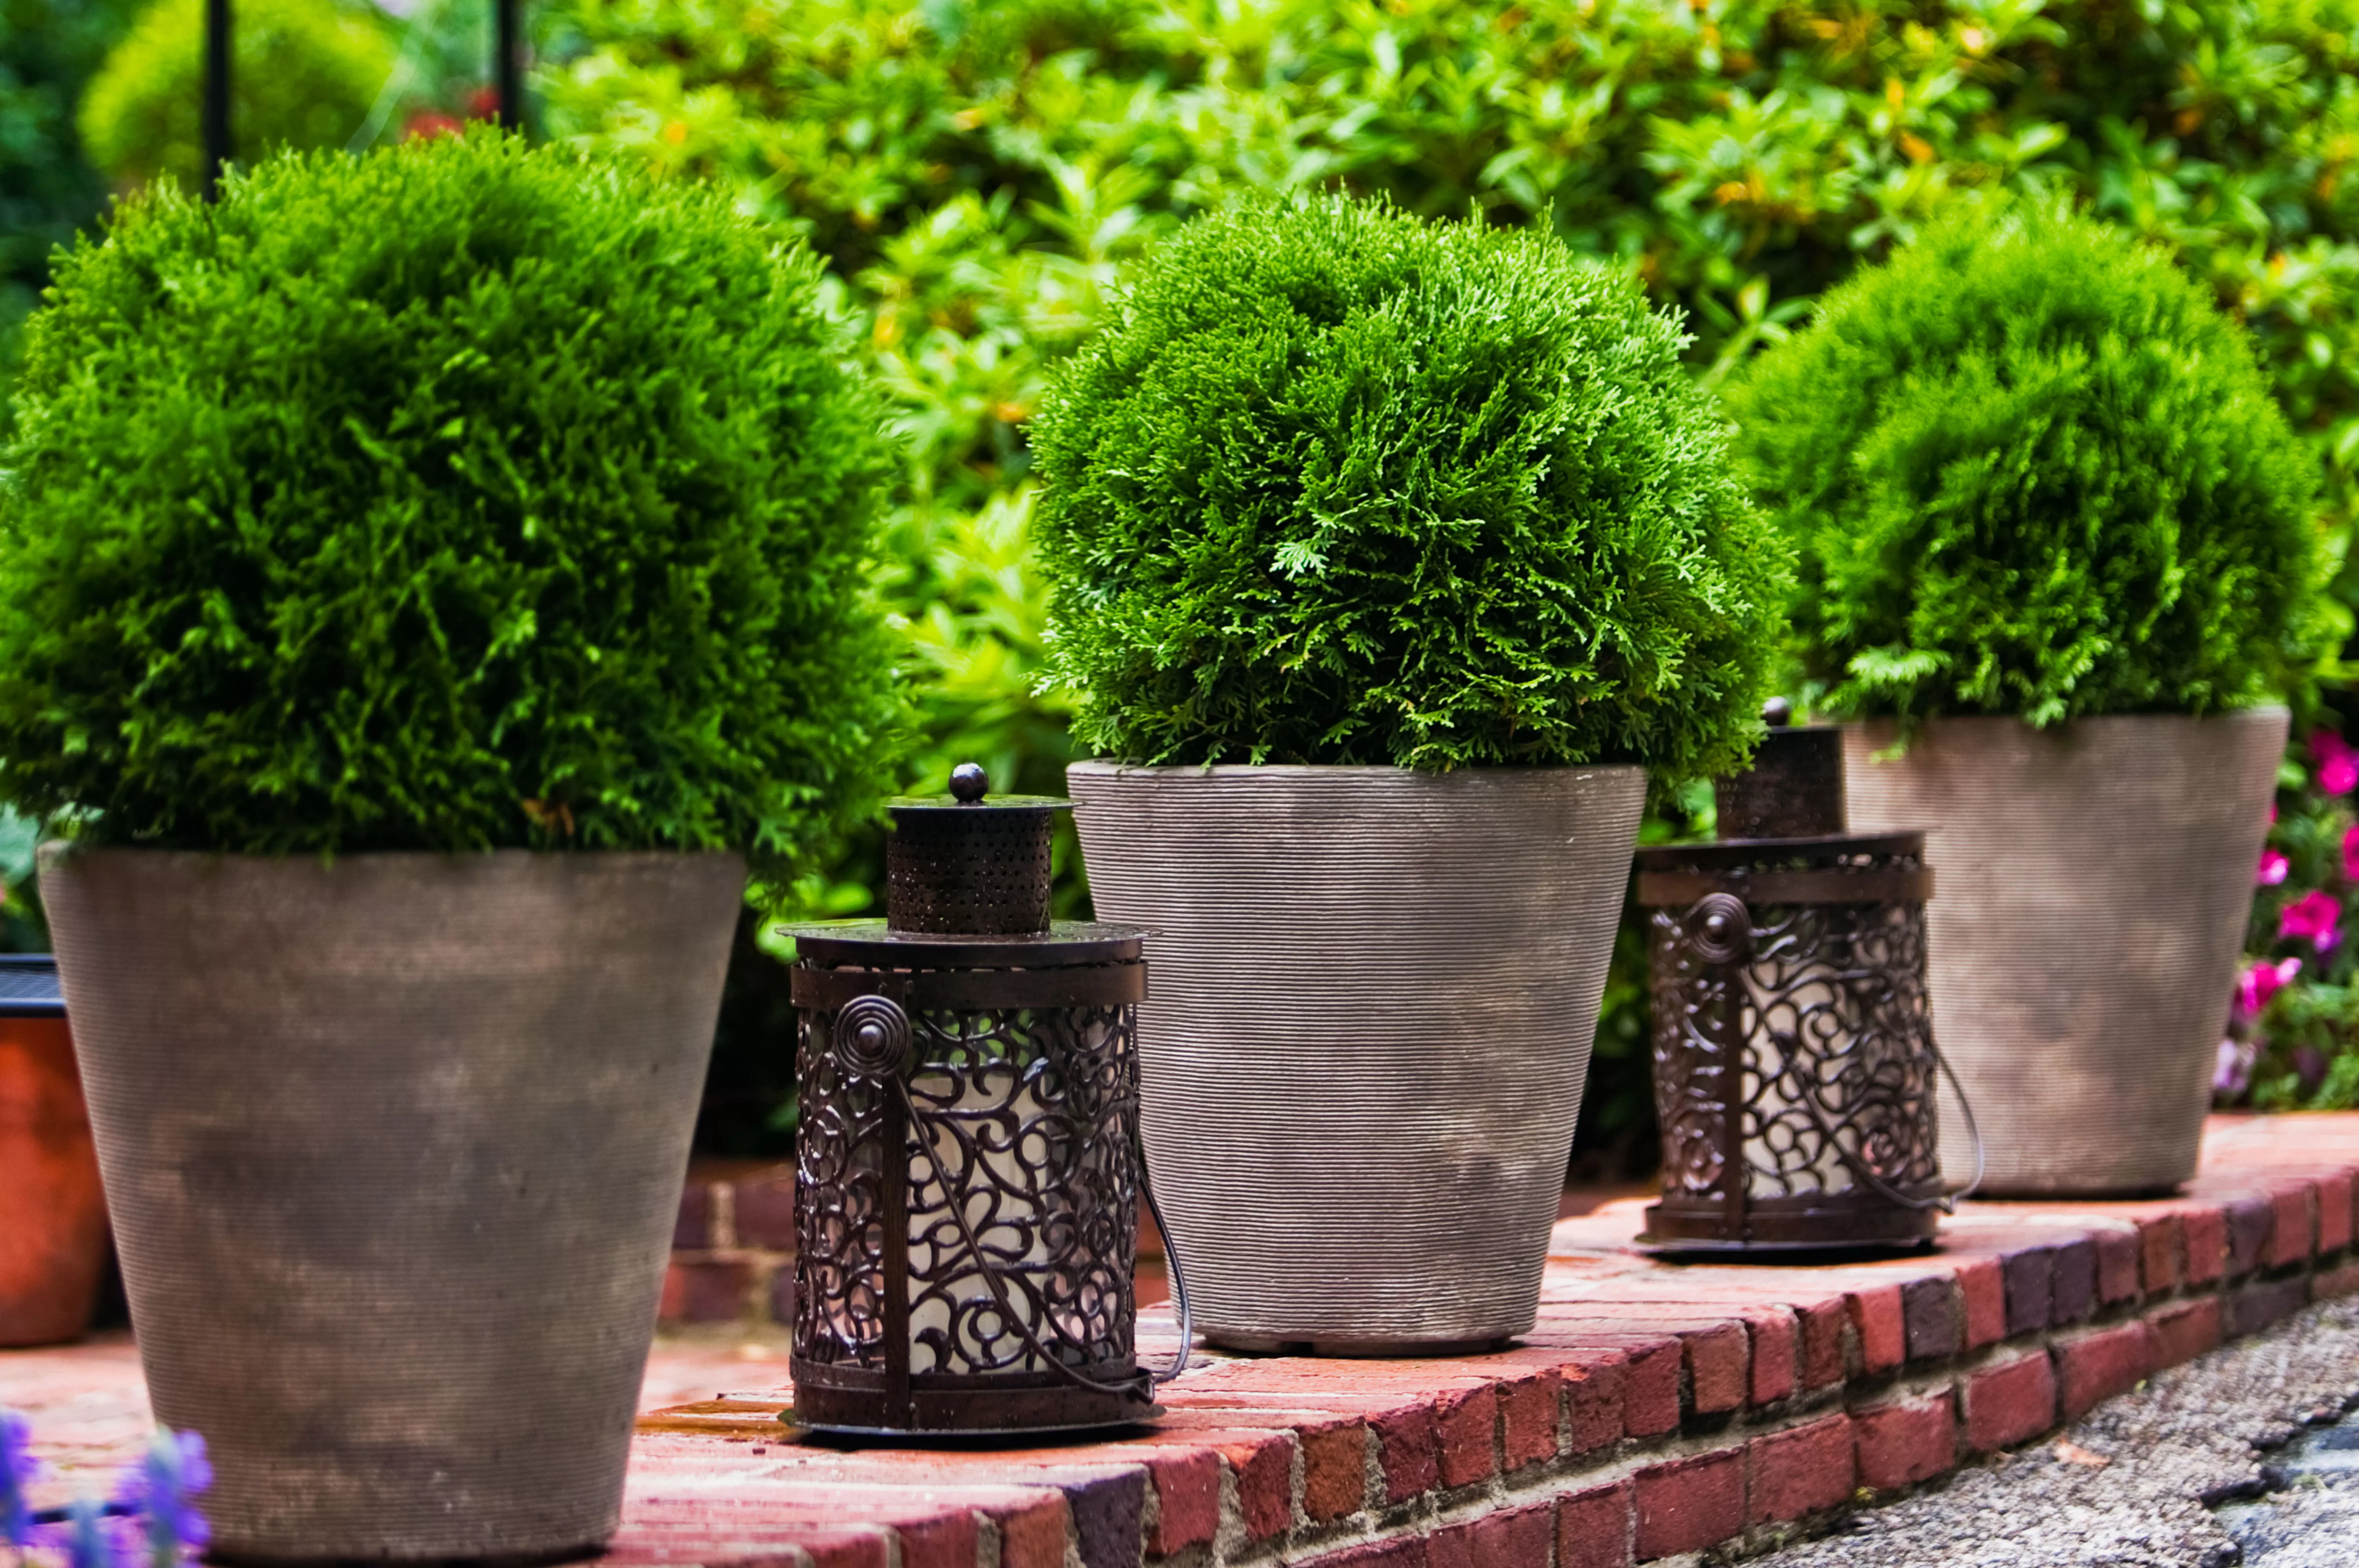 Shrubs in planters